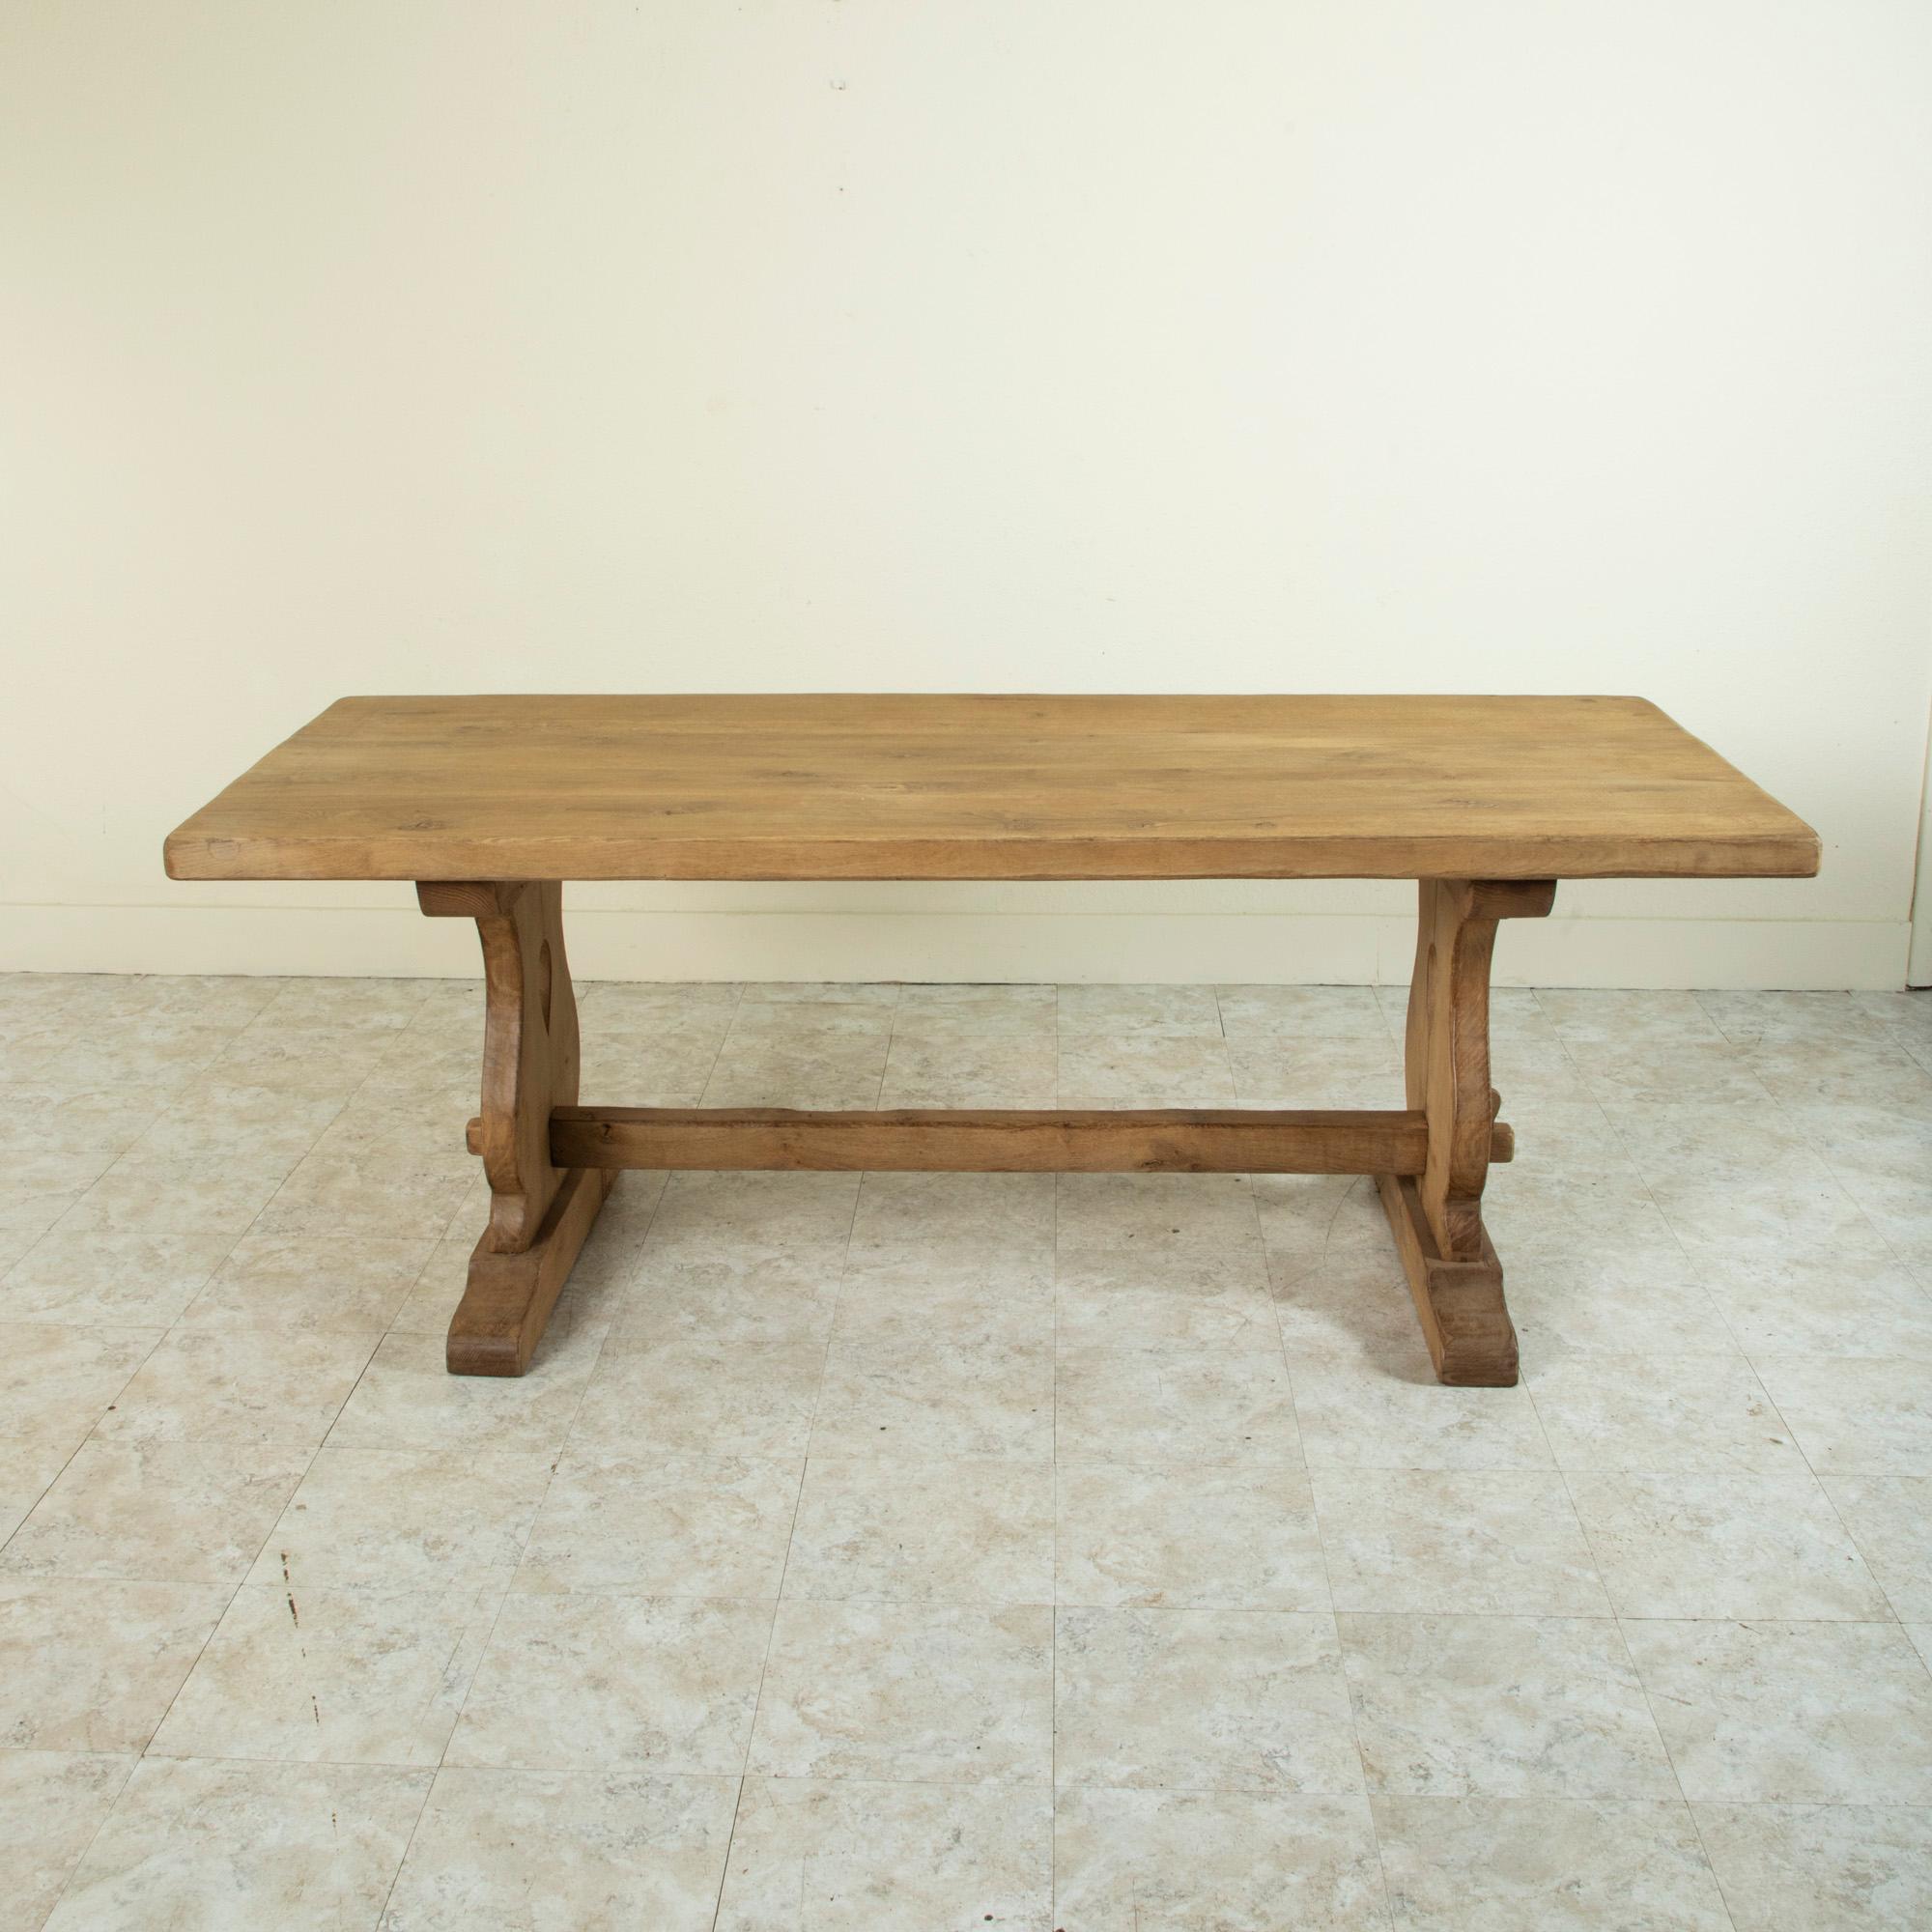 Rustic French Bleached Oak Normandy Monastery Table, Farm Table, Trestle Table, C. 1900